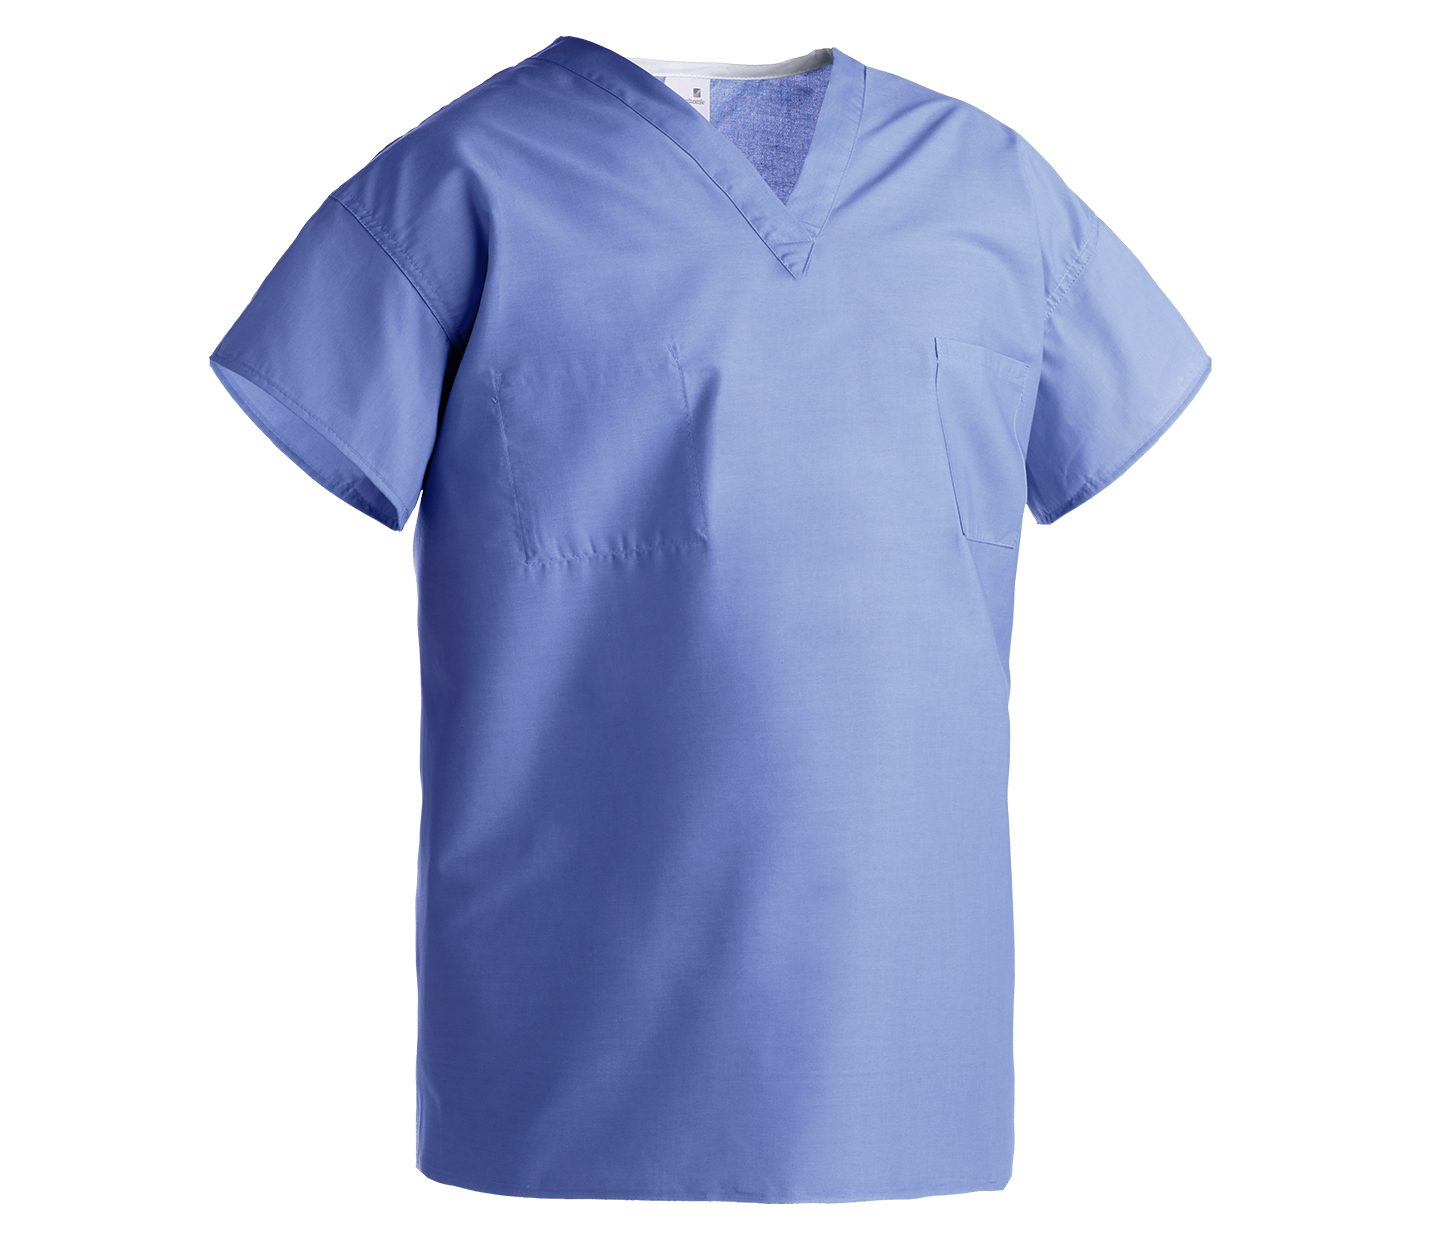 SCRUB TOPS. 100% Cotton in Various Patterns to Suit Medical and